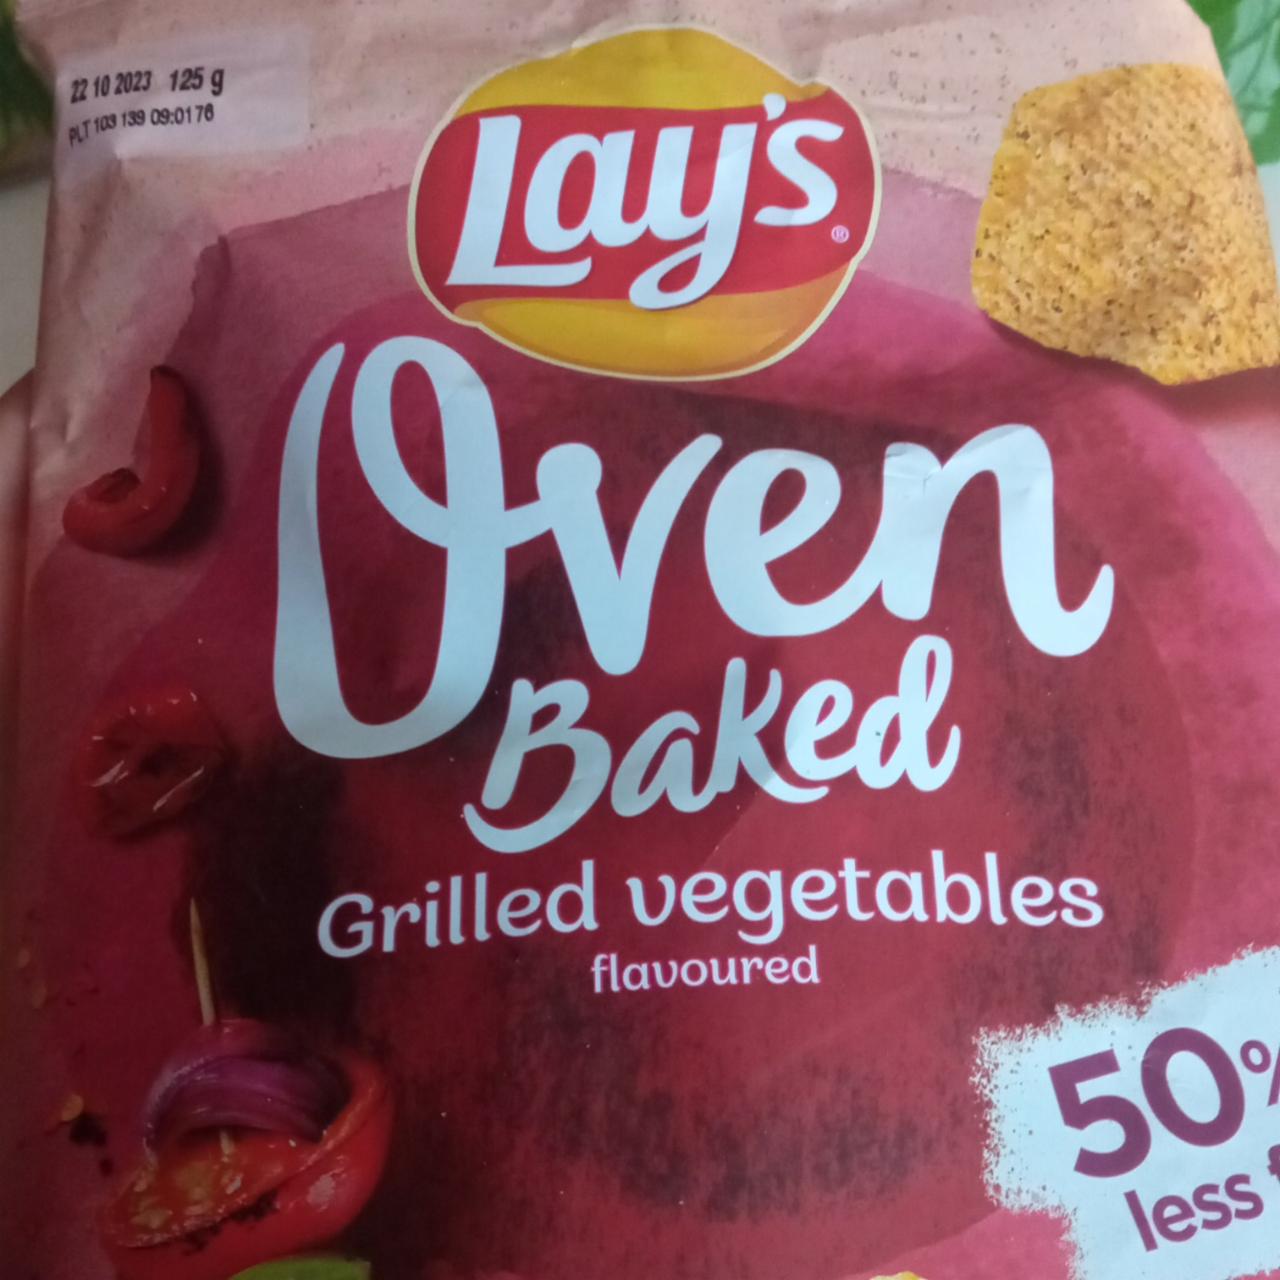 Zdjęcia - Oven Baked Grilled Vegetables Lay's